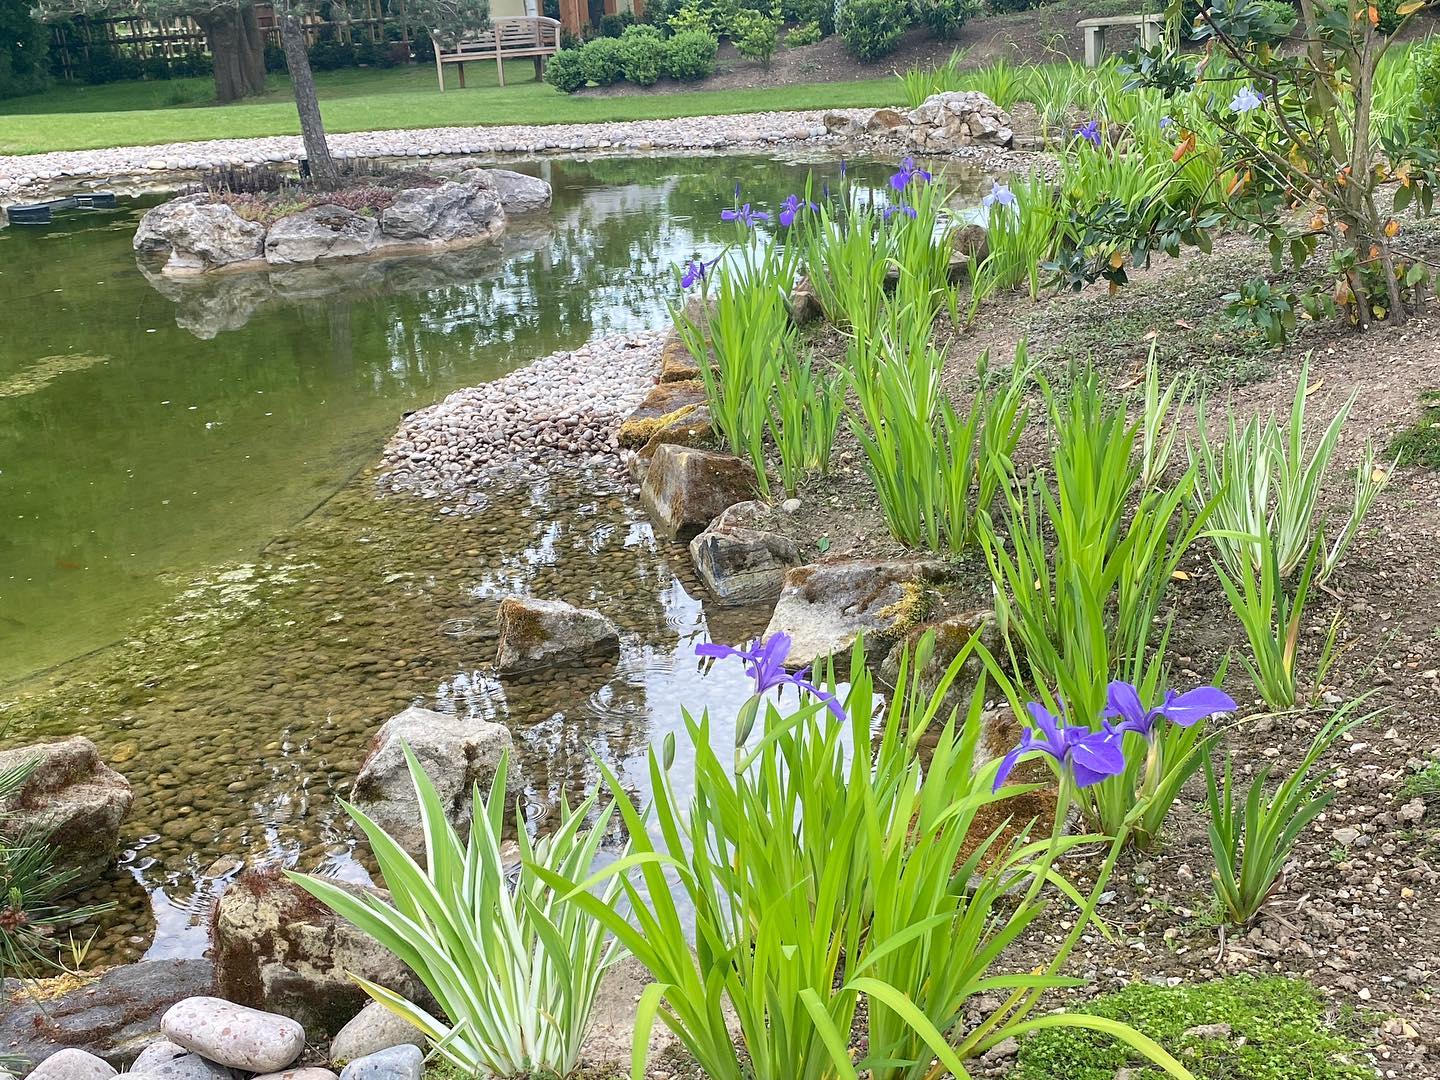 Irises by the pond in the Japanese garden, planted last year. 

#irises